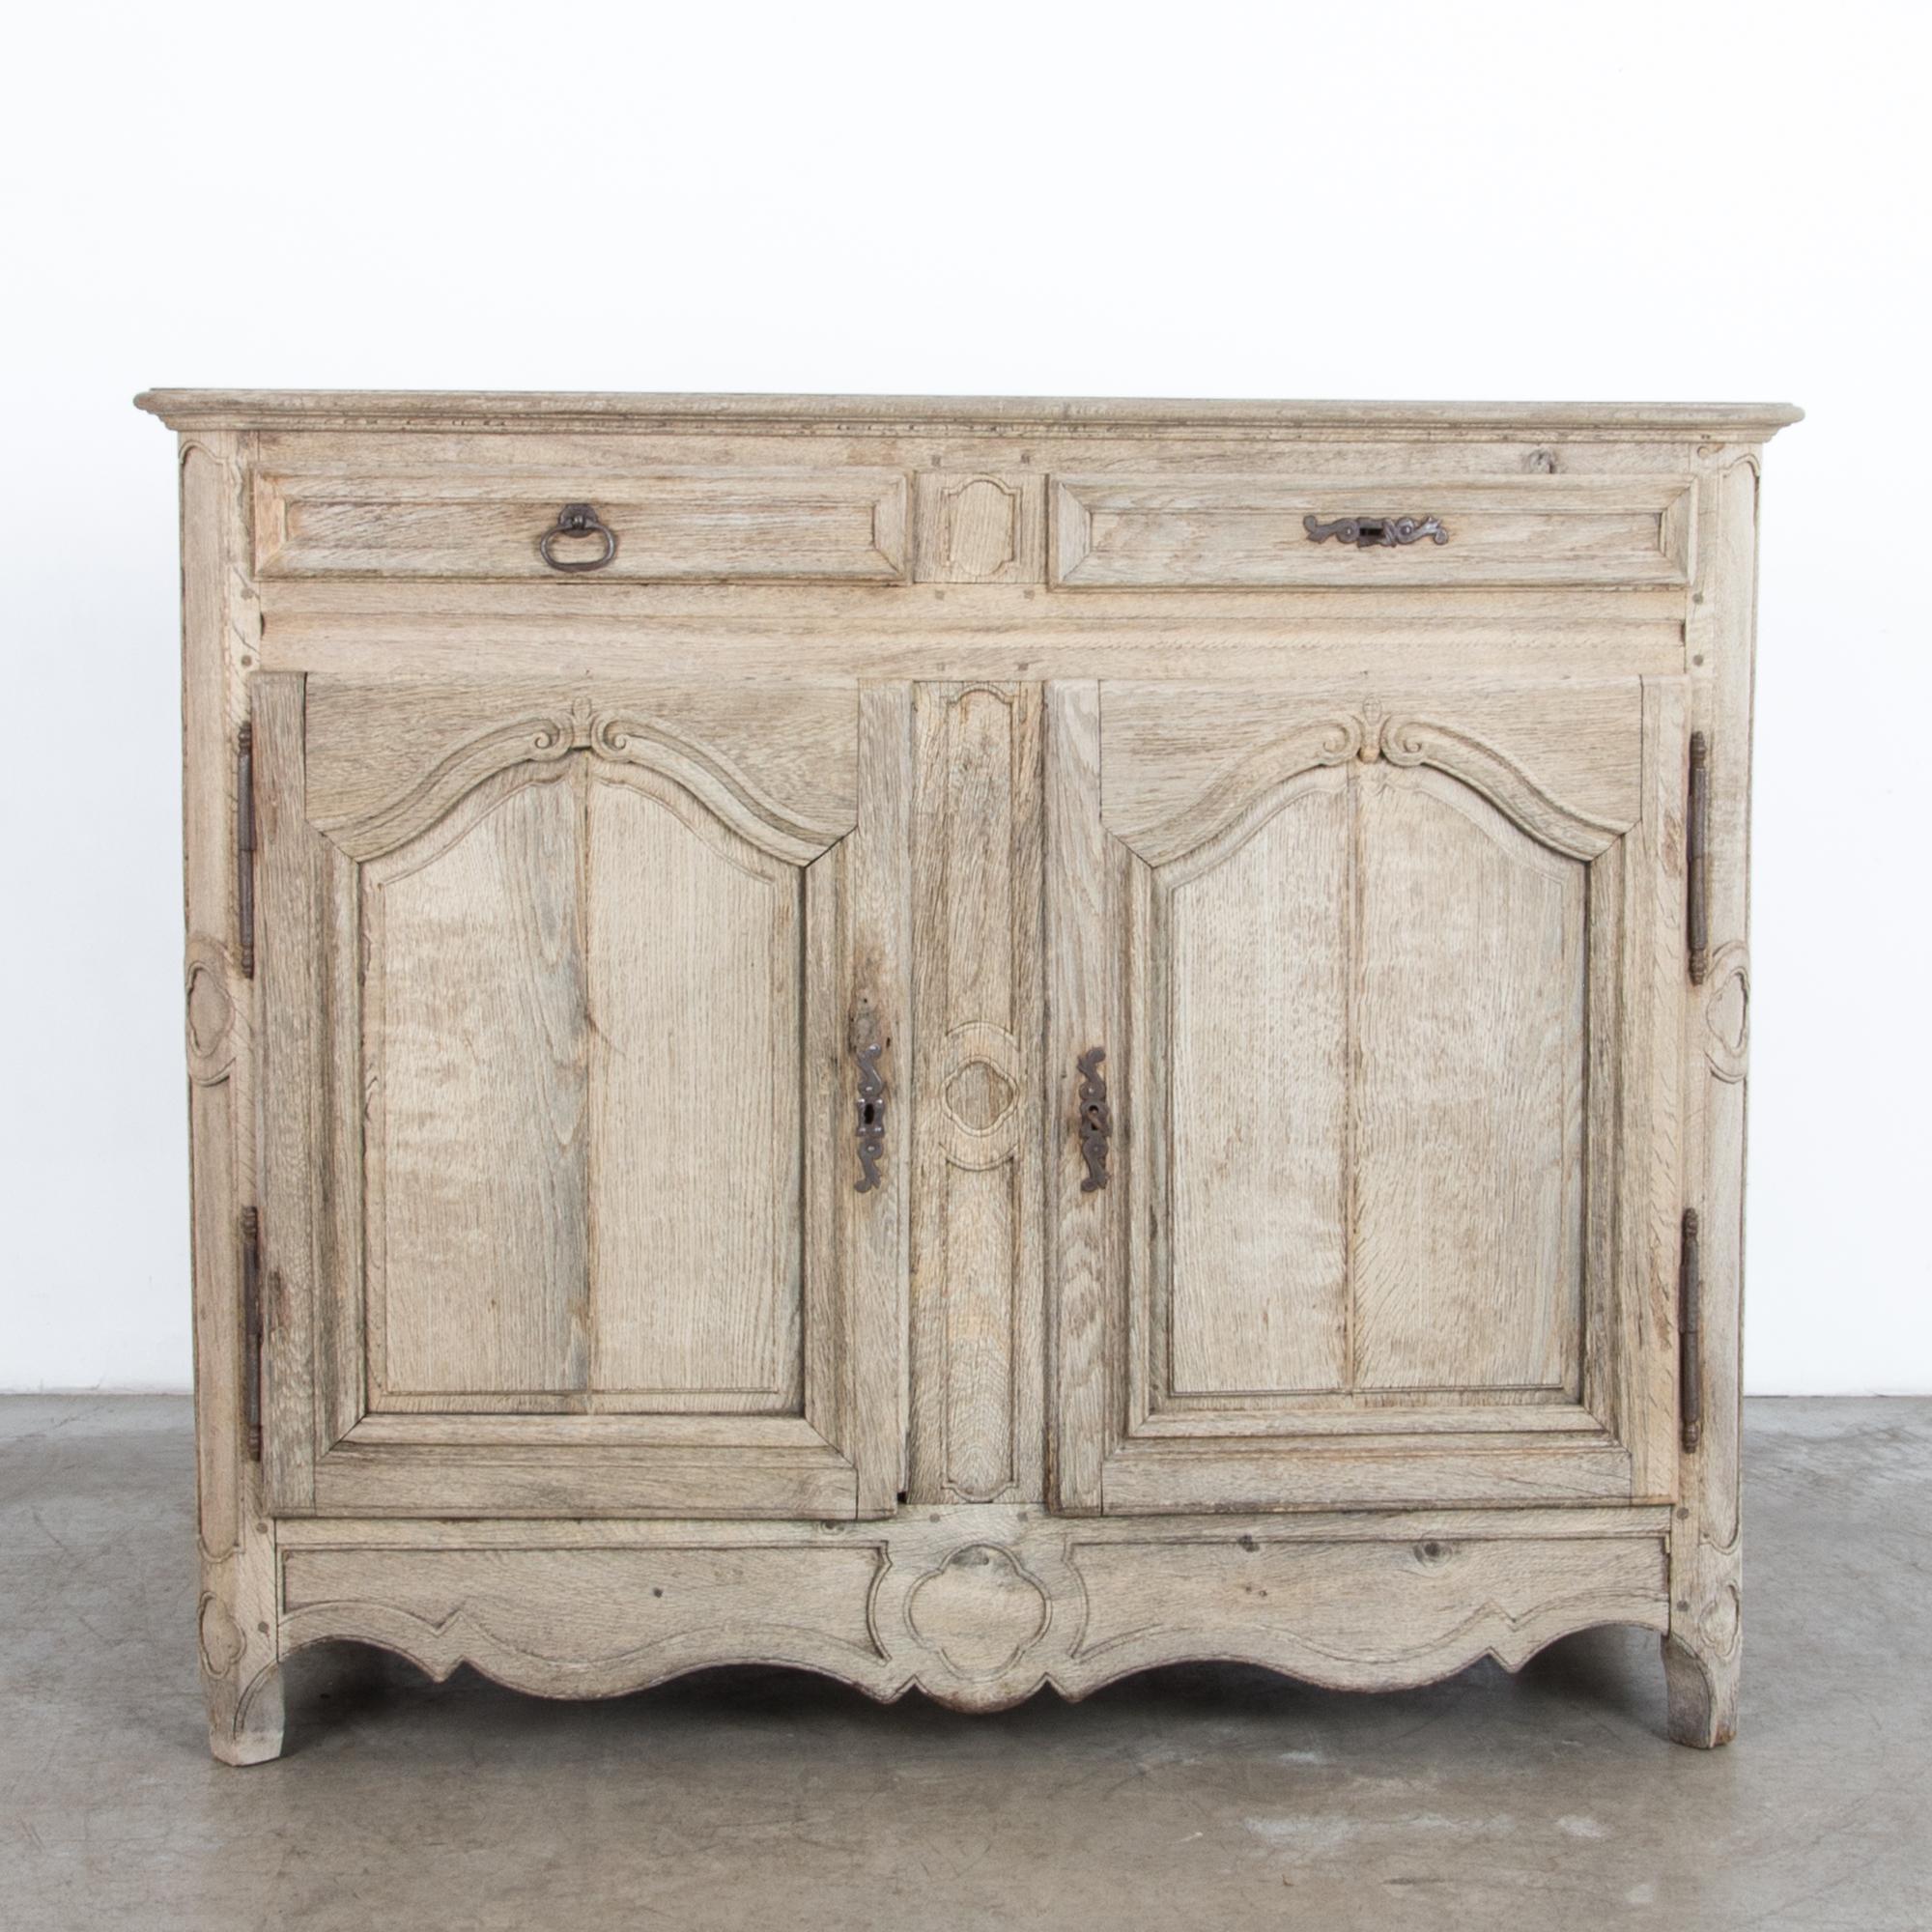 A two door and drawer cabinet from France, circa 1800. Representing the casual yet refined aesthetic of the French countryside, finished in a contemporary bright finish, enhancing the natural textured figure of the wood and subtle carved ornament. A